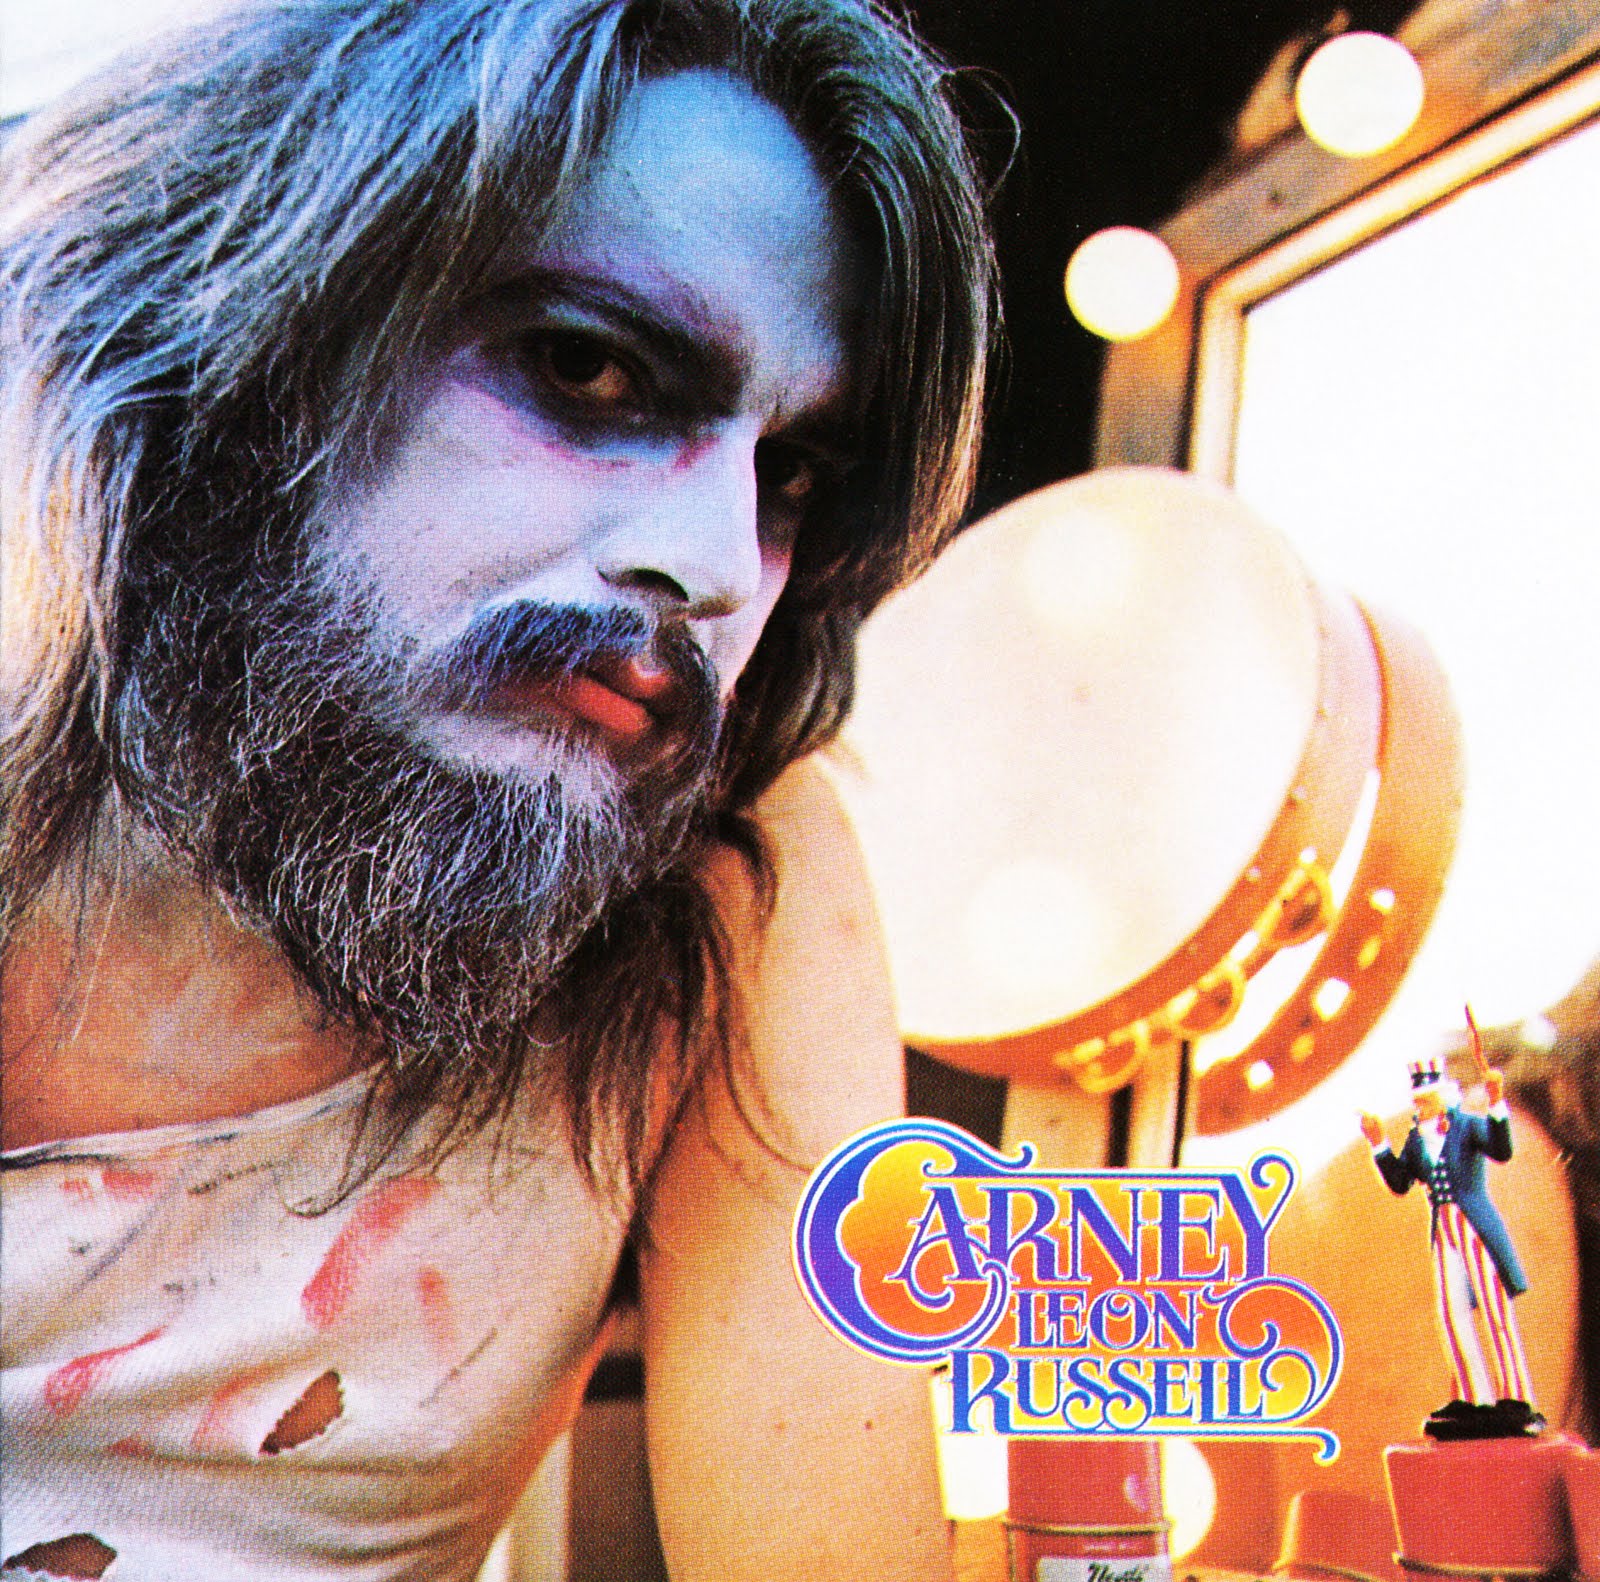 Leon Russell 1972 Carney 24-192